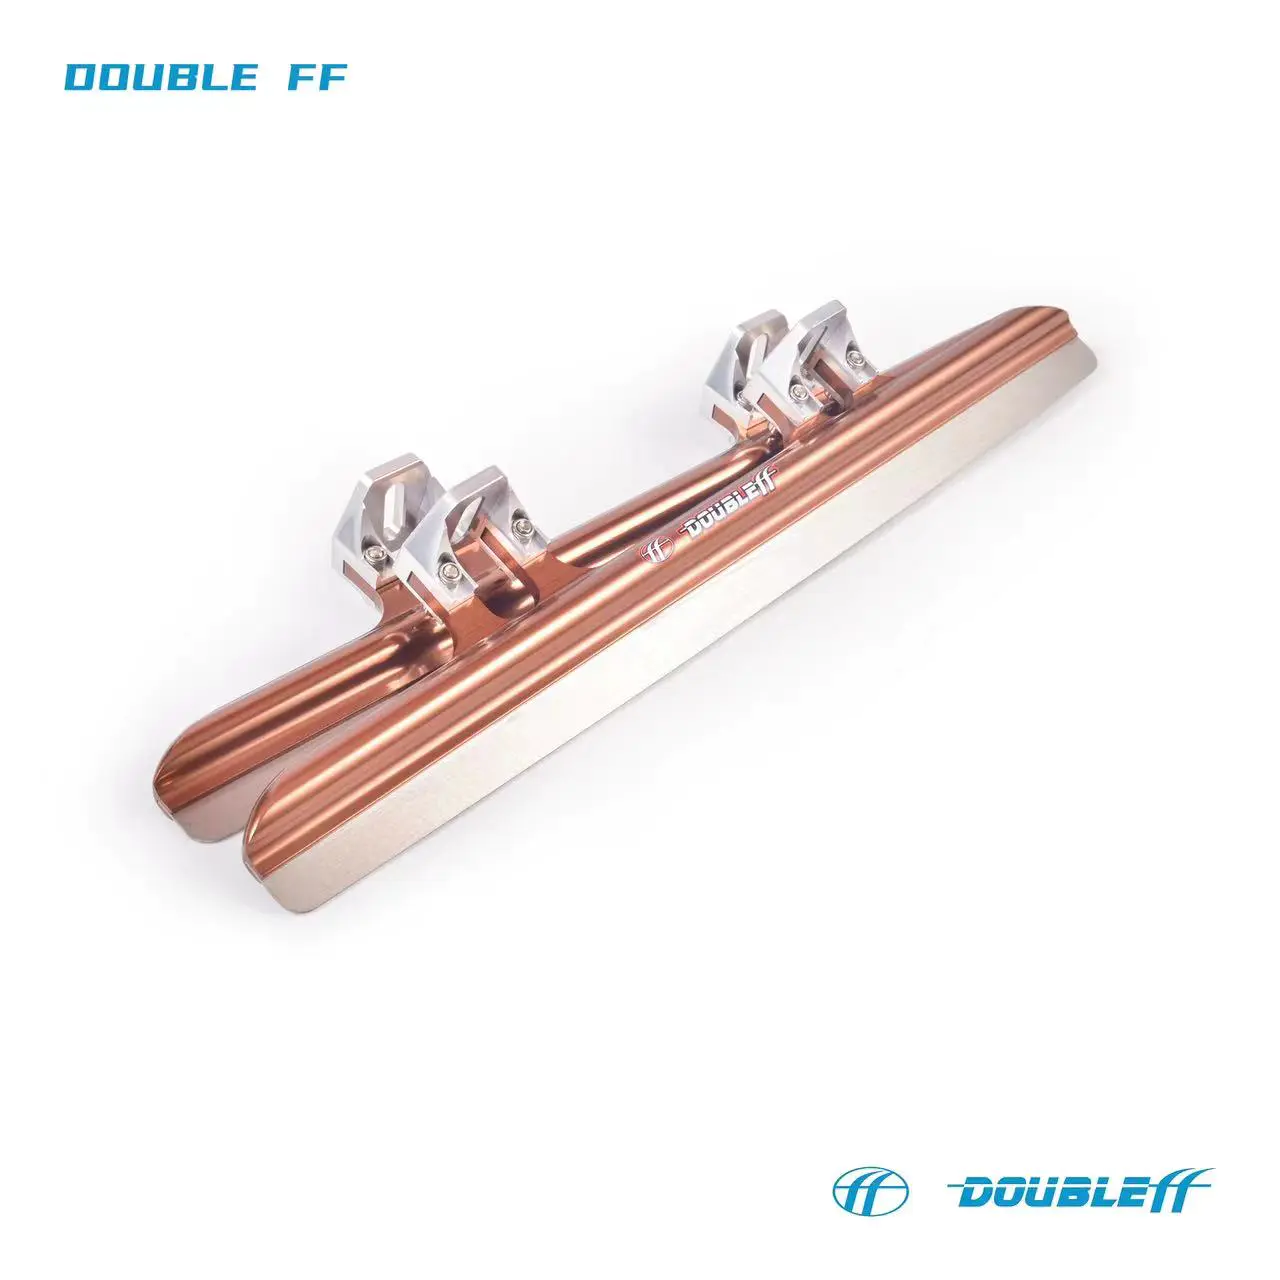 Double FF Professional Short Track Ice Skate Blades 64HRC CNC Aluminum 7005 Ice Skate Blades Professional Double Alloy Blade-Brown